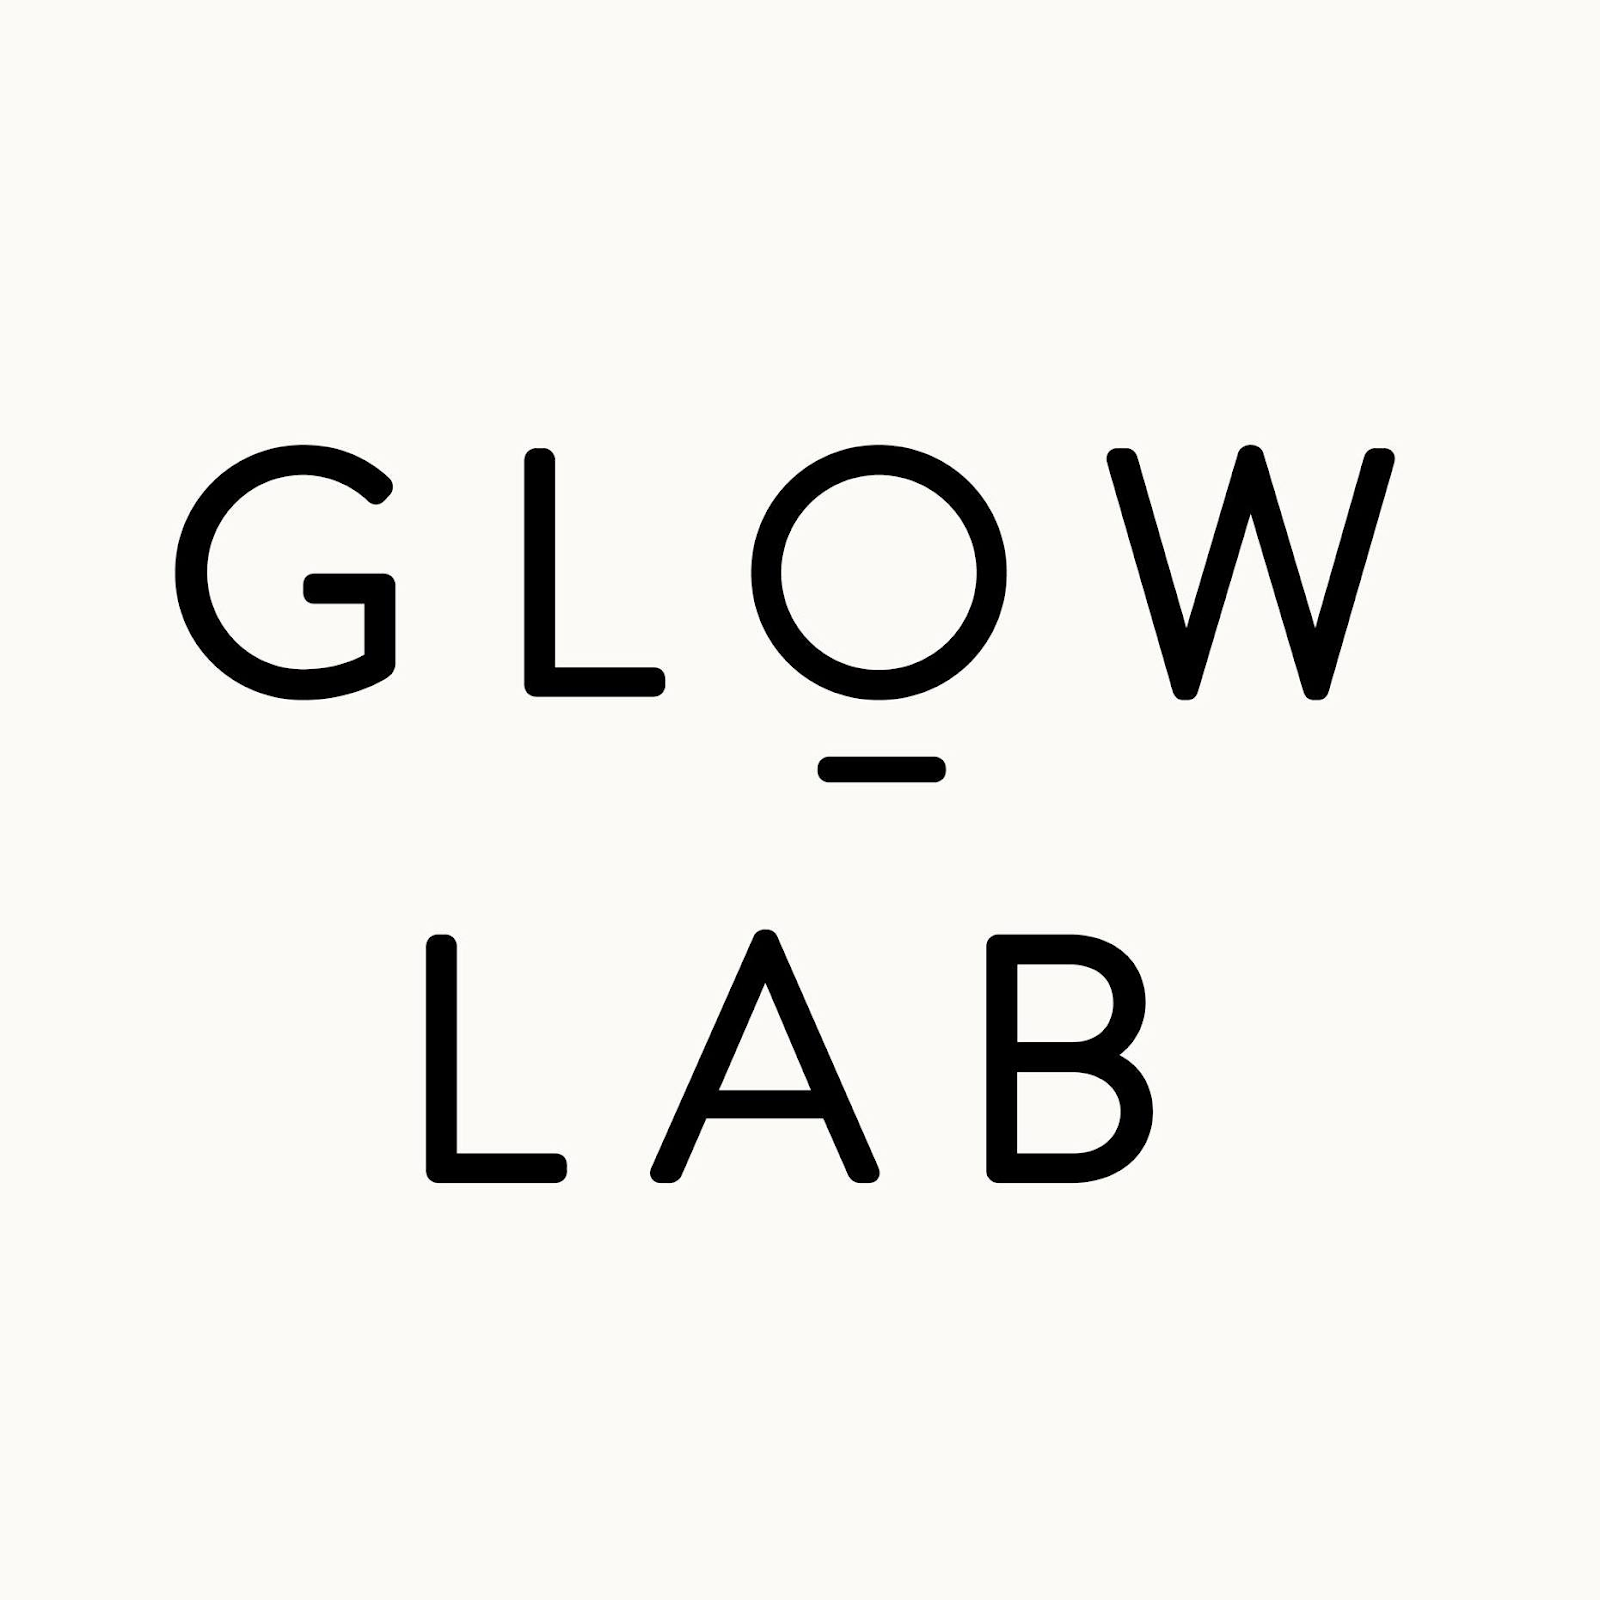 Susan Yara: Blending Influence And Innovation With MIXEDMAKEUP, GlowLab Collective, And The Digital Department